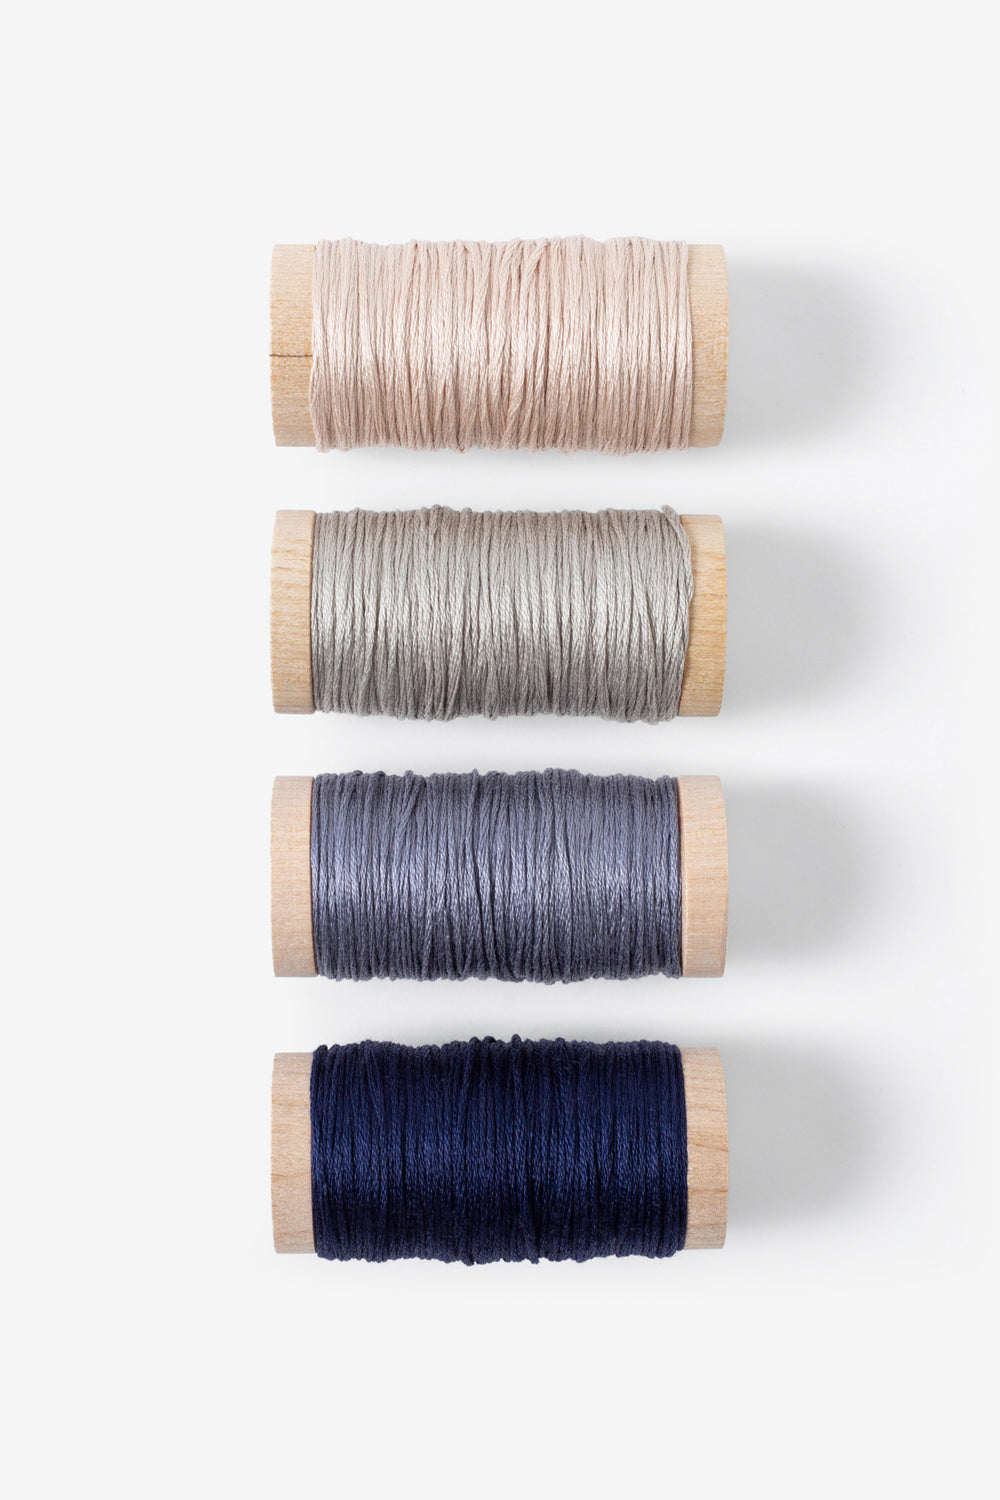 The School of Making Embroidery Floss Bundle in soft tan, light gray, slate blue, and navy blue colors.